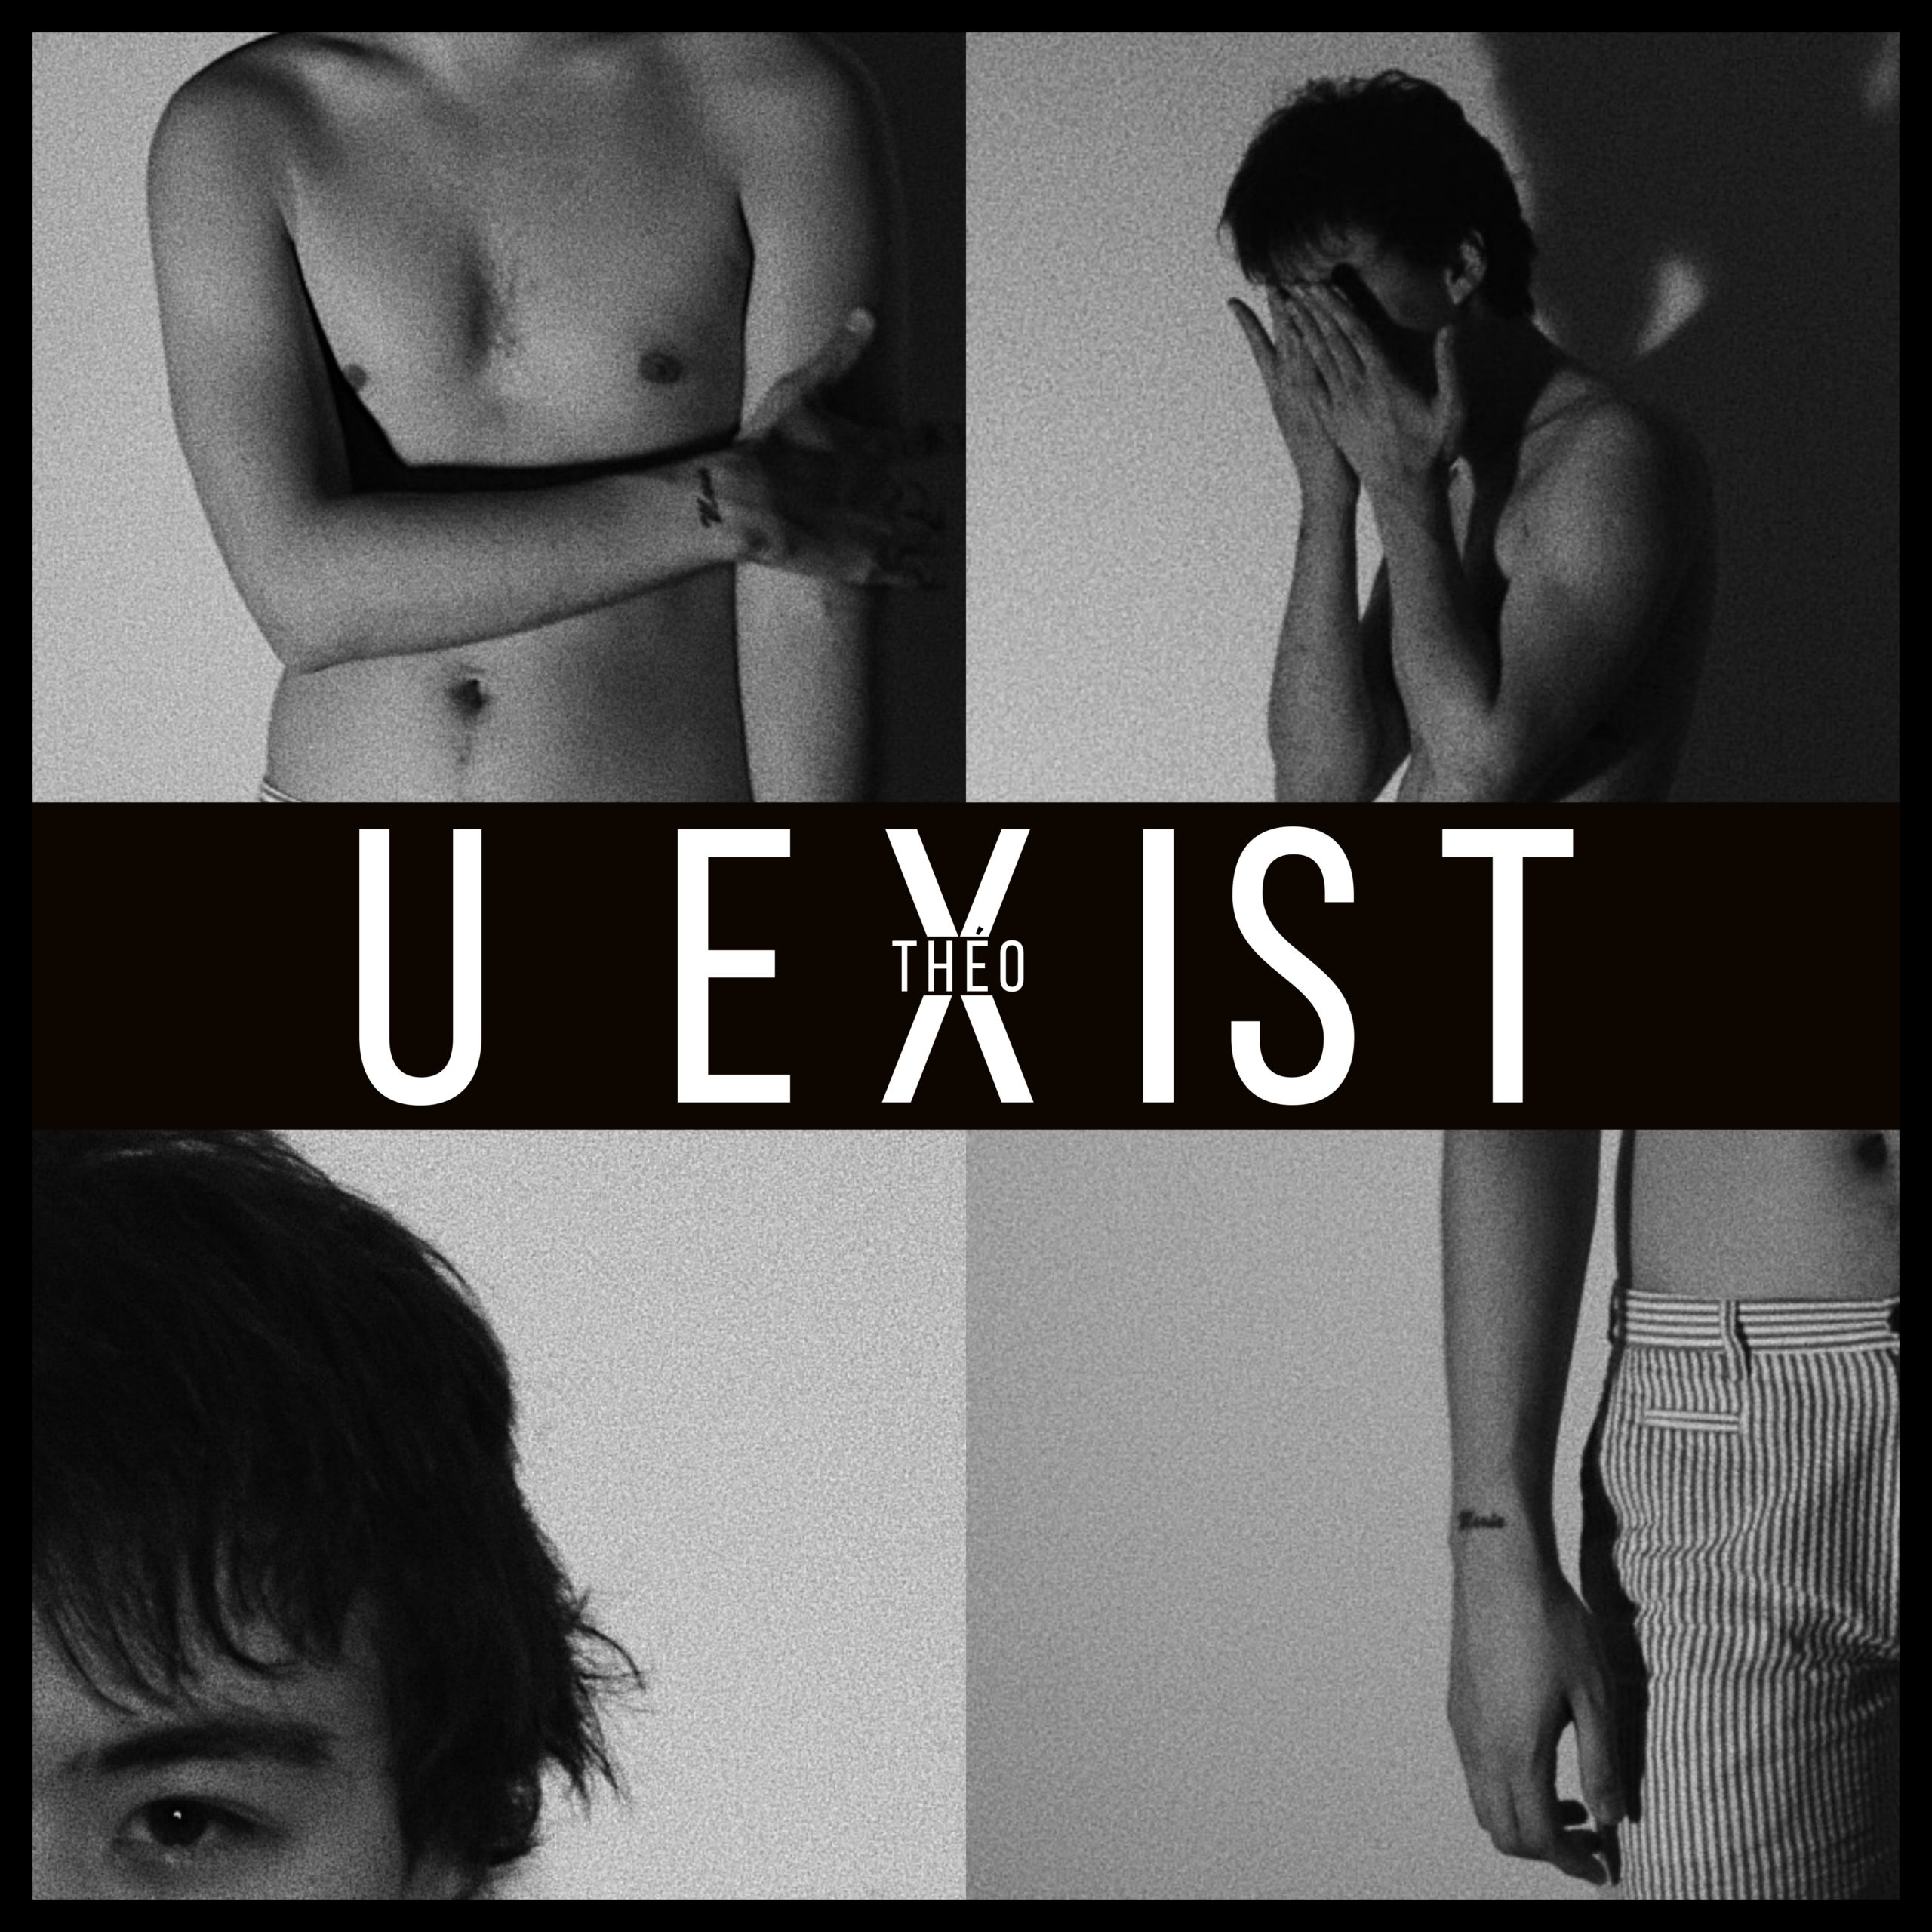 Theo-Uexist-Cover